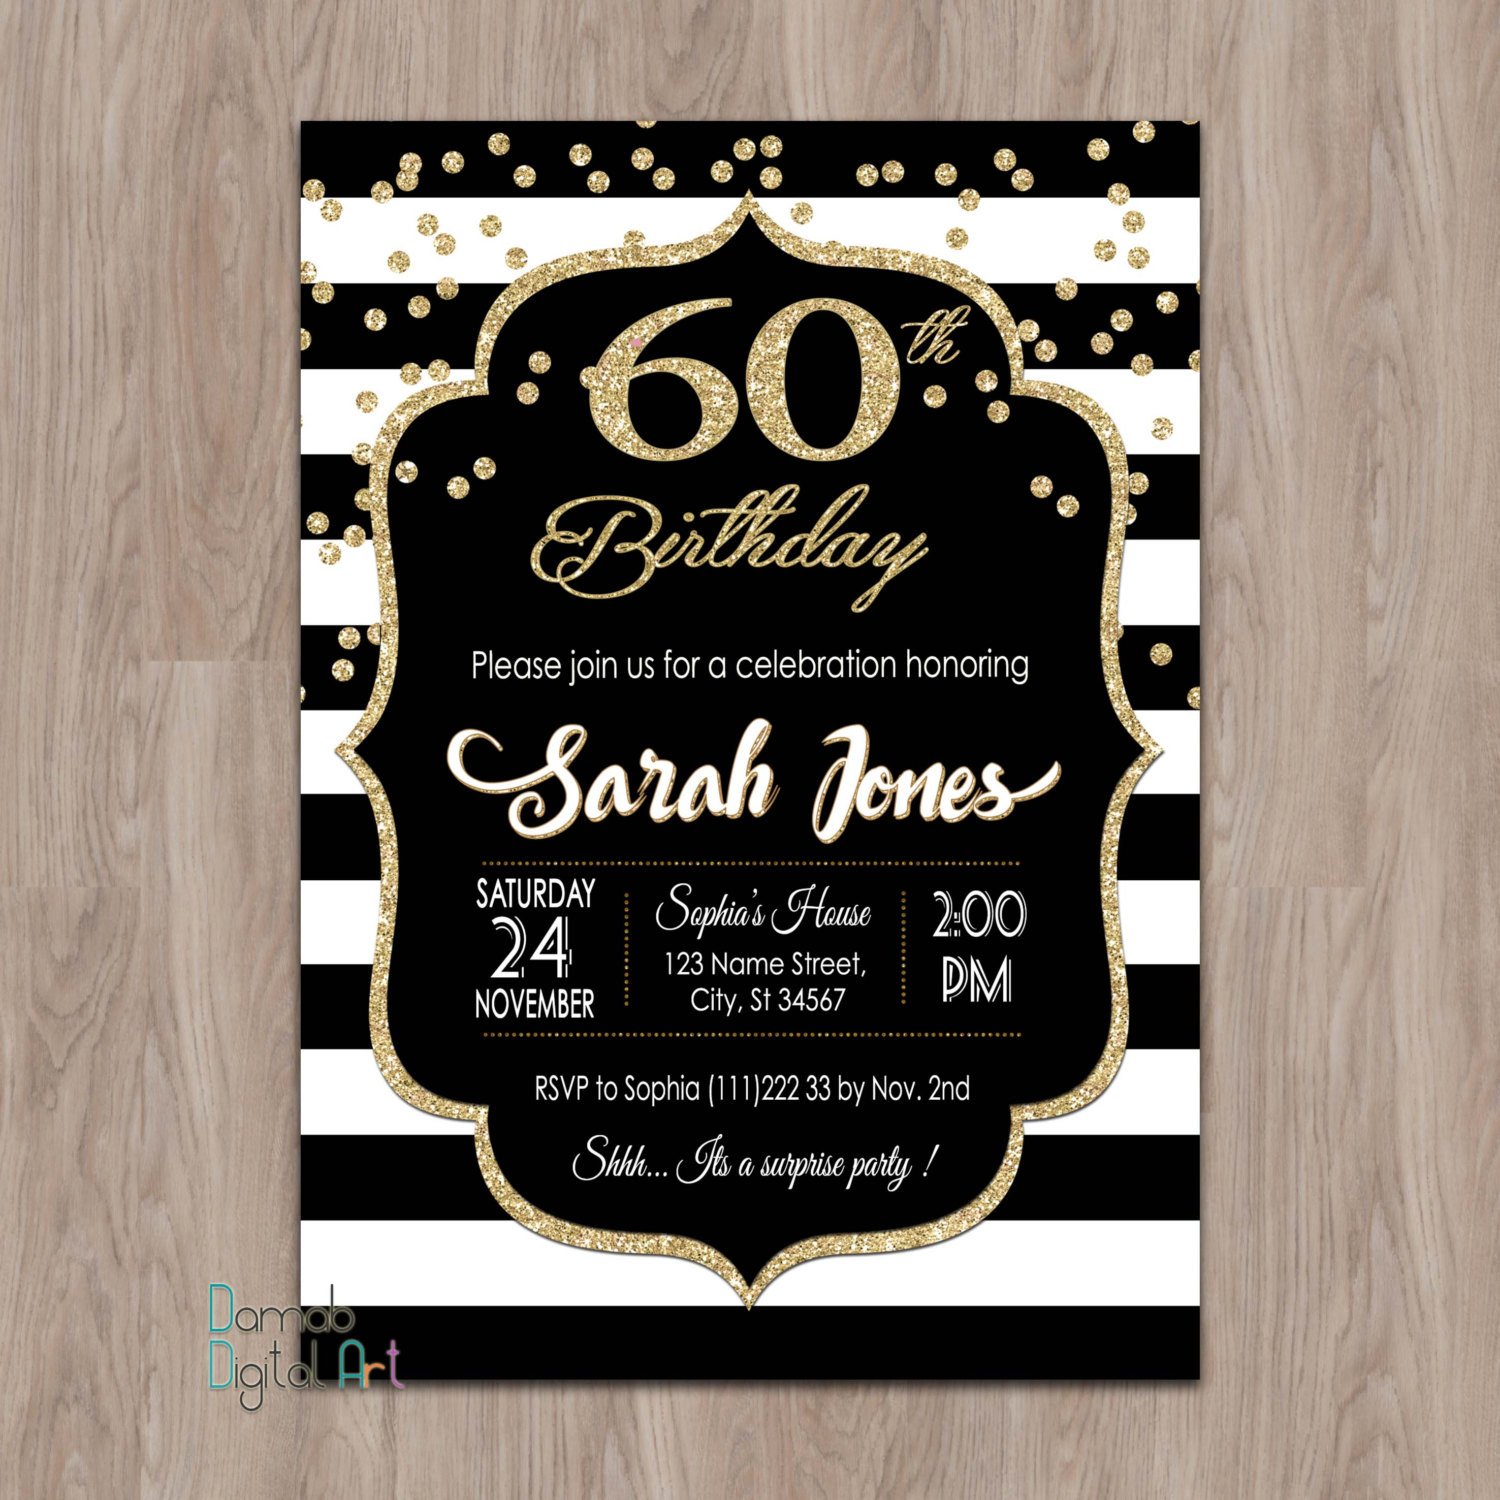 60th birthday invitations 60th birthday invitations for